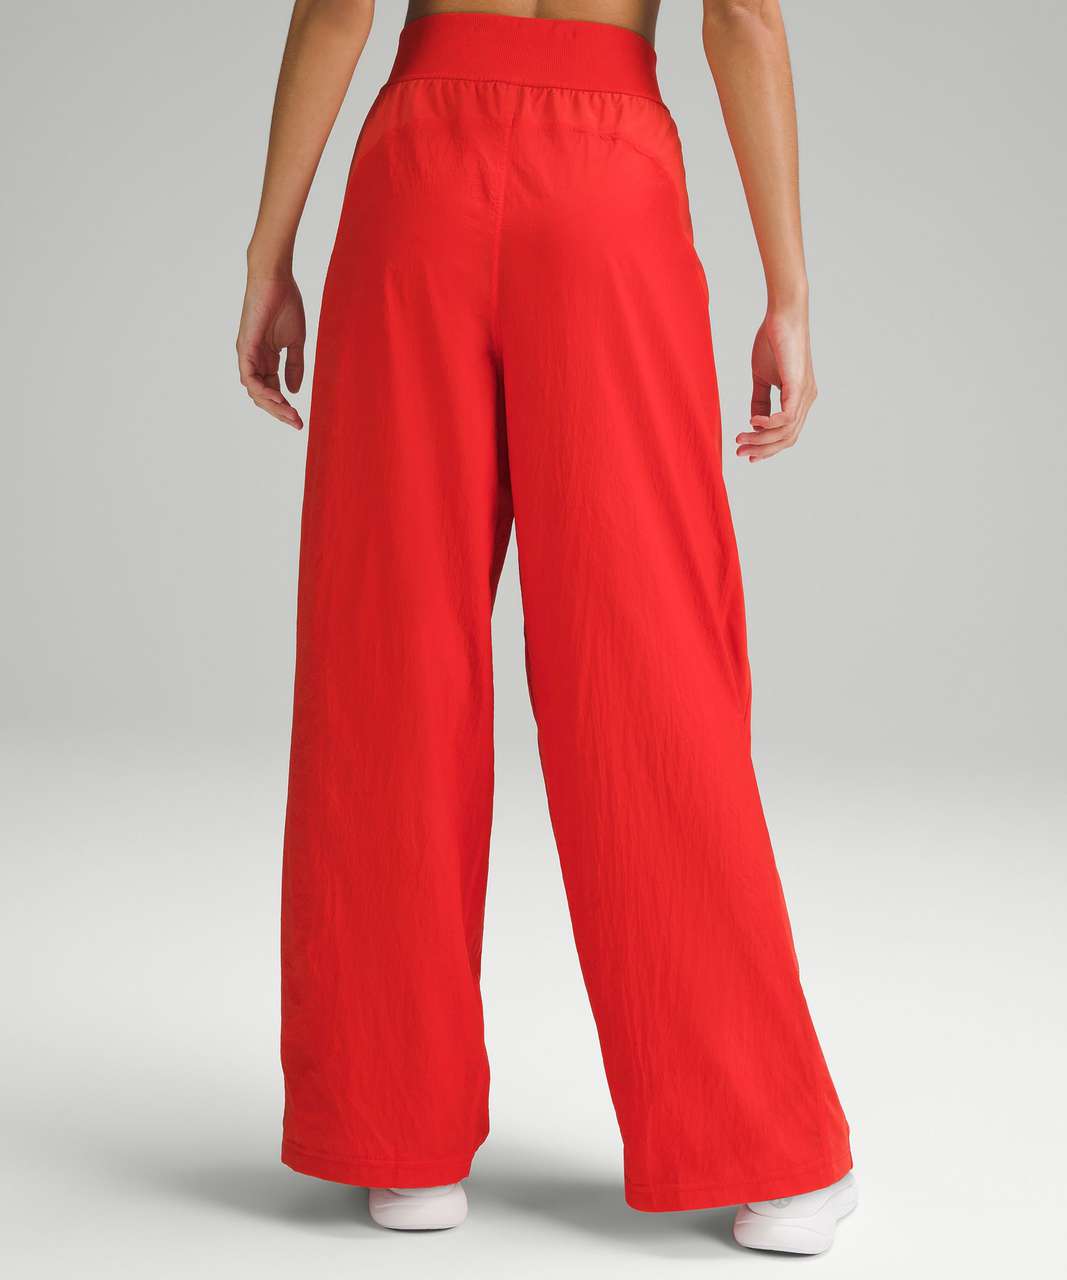 Tenes Red Palazzo High Waisted Trousers Women